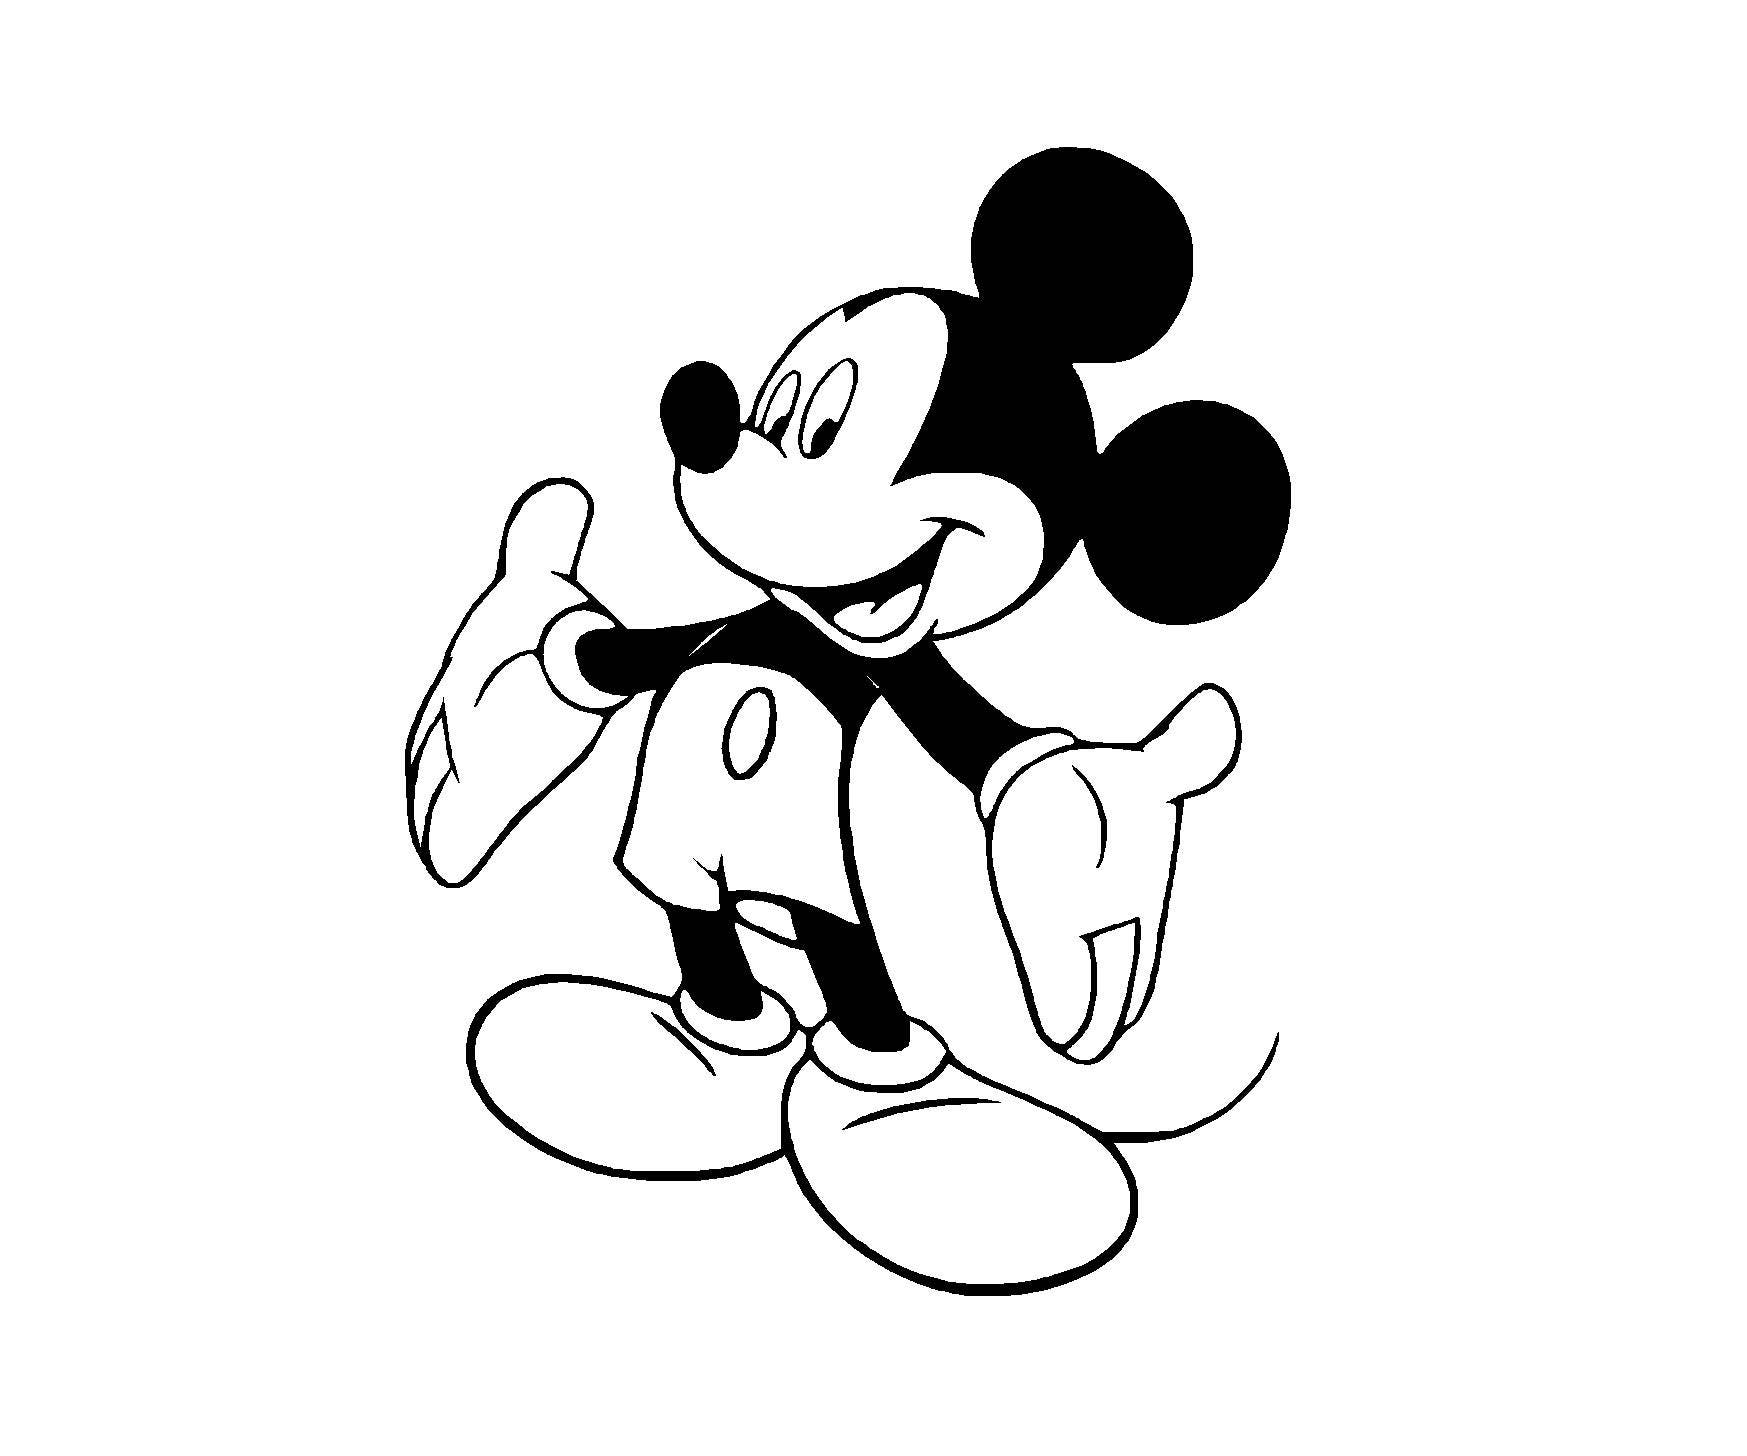 Mickey Mouse Clubhouse Logo, meaning, history, PNG, SVG, vector